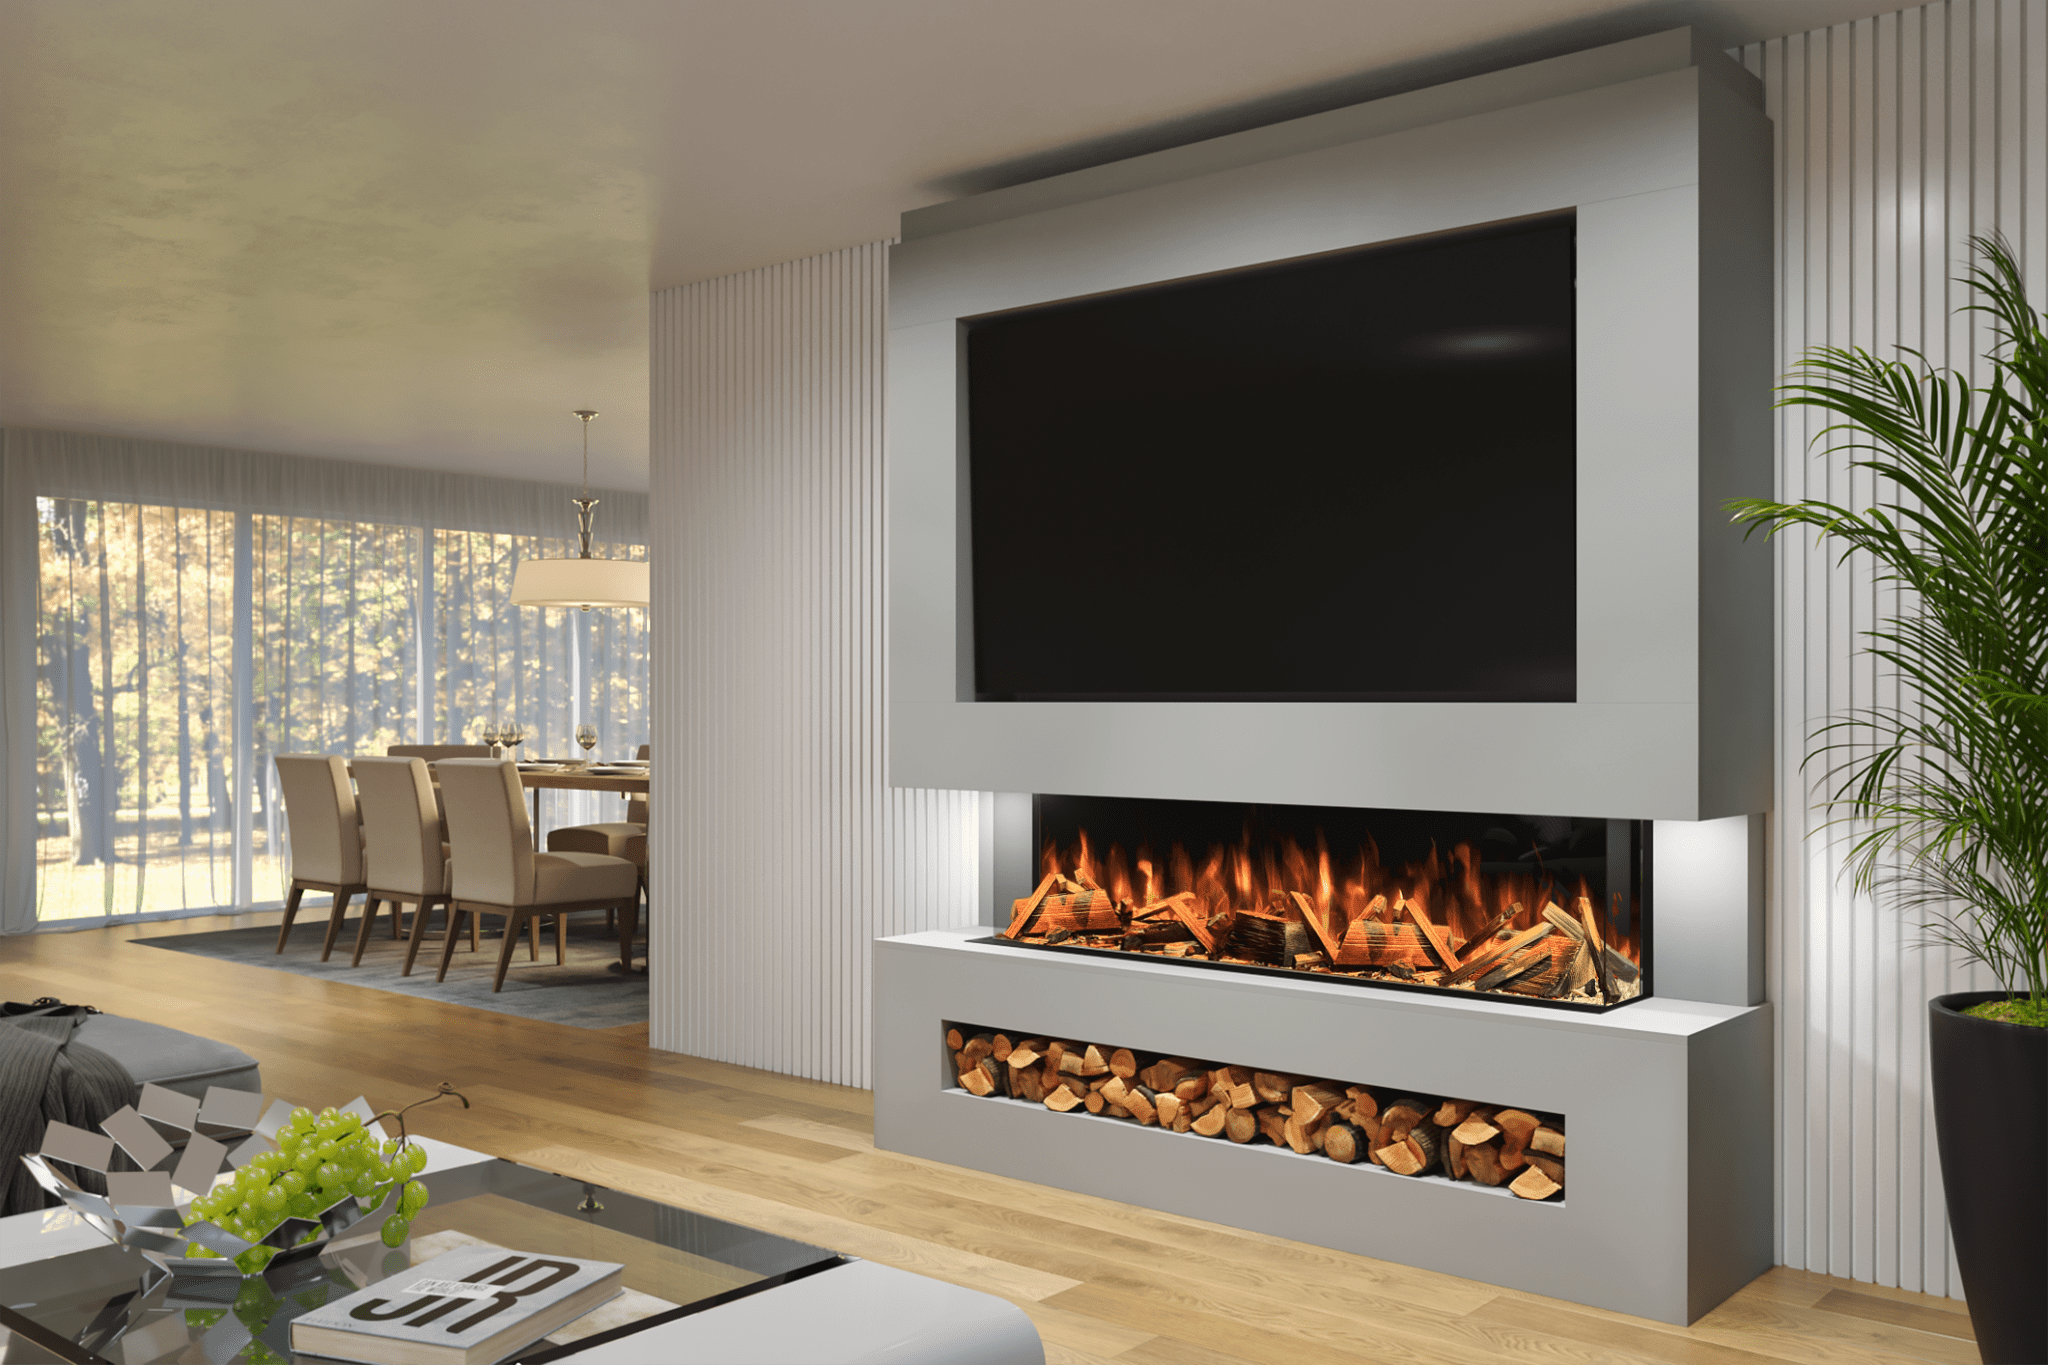 Beyond Borders: Elevate Your Entertainment with a TV Media Wall Unit | Evolution Fires